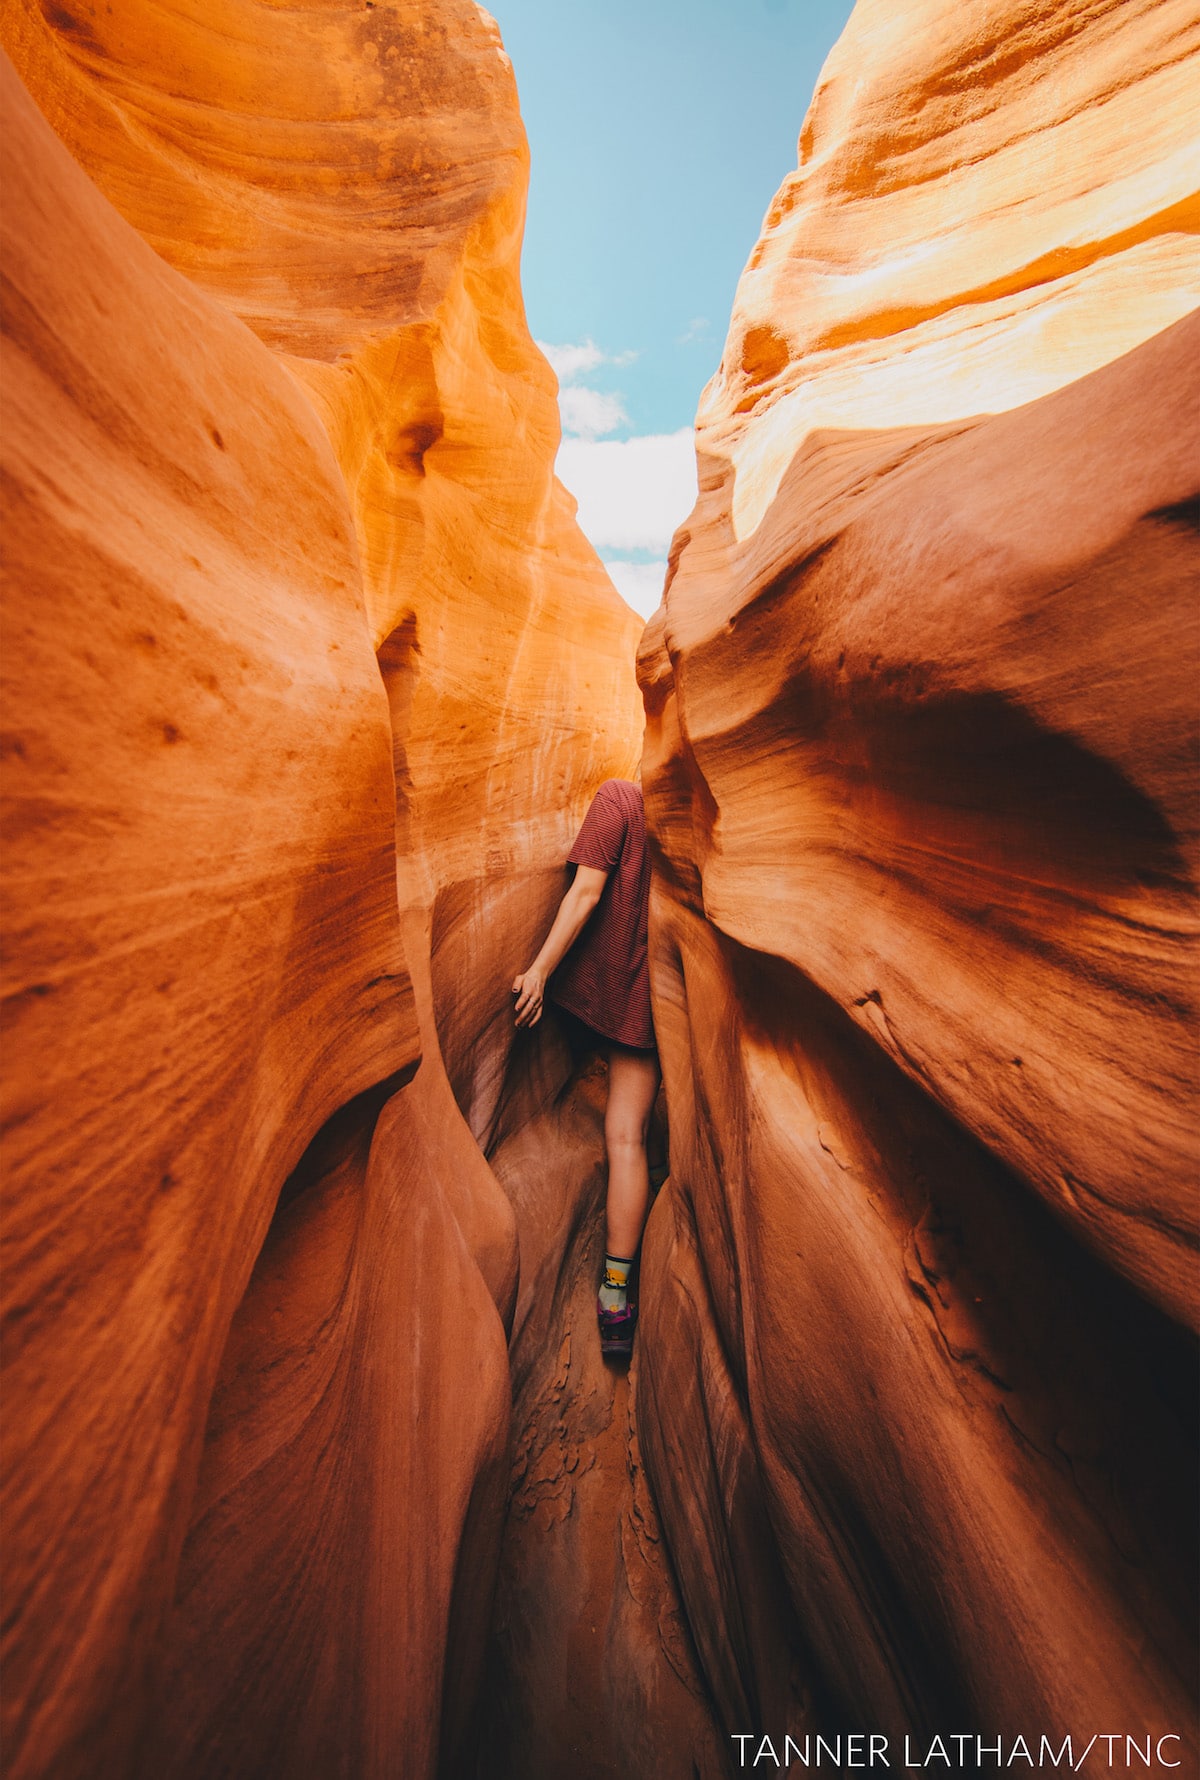 People in Nature Photo by Tanner Latham